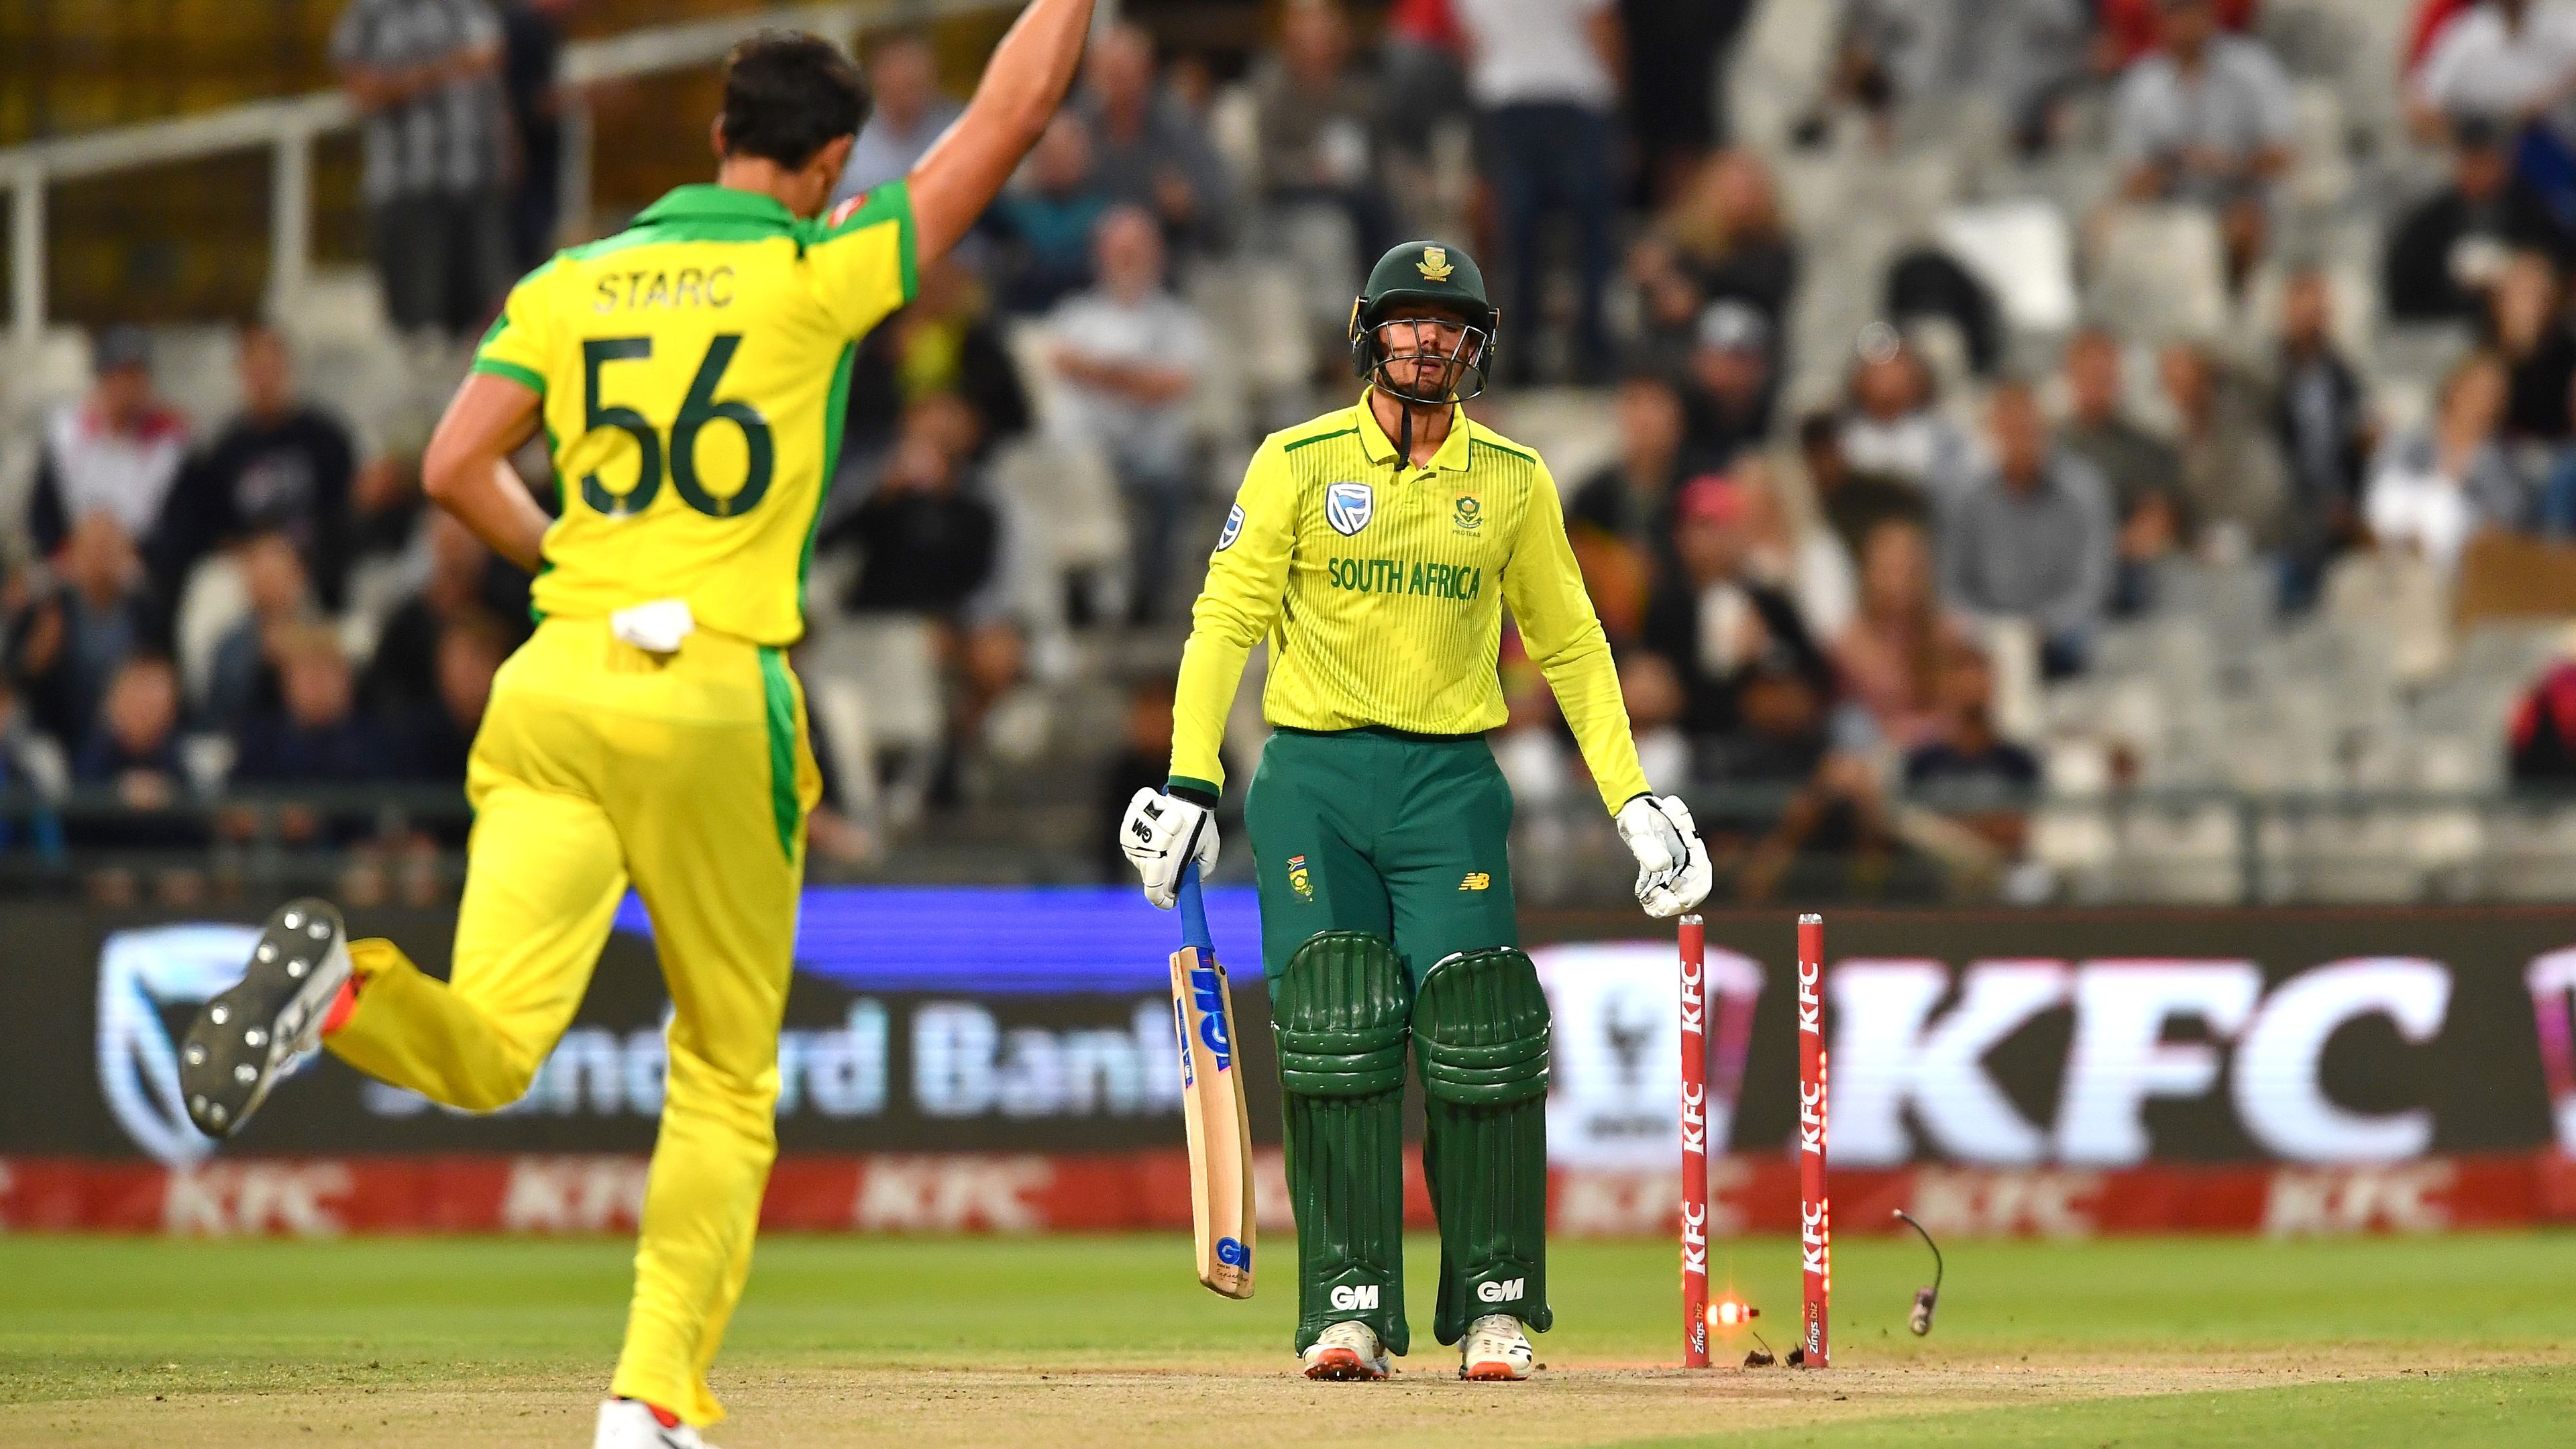 Quinton de Kock is bowled by Mitchell Starc during the 3rd T20 International match between South Africa and Australia at Newlands in February 2020. Photo: Ashley Vlotman